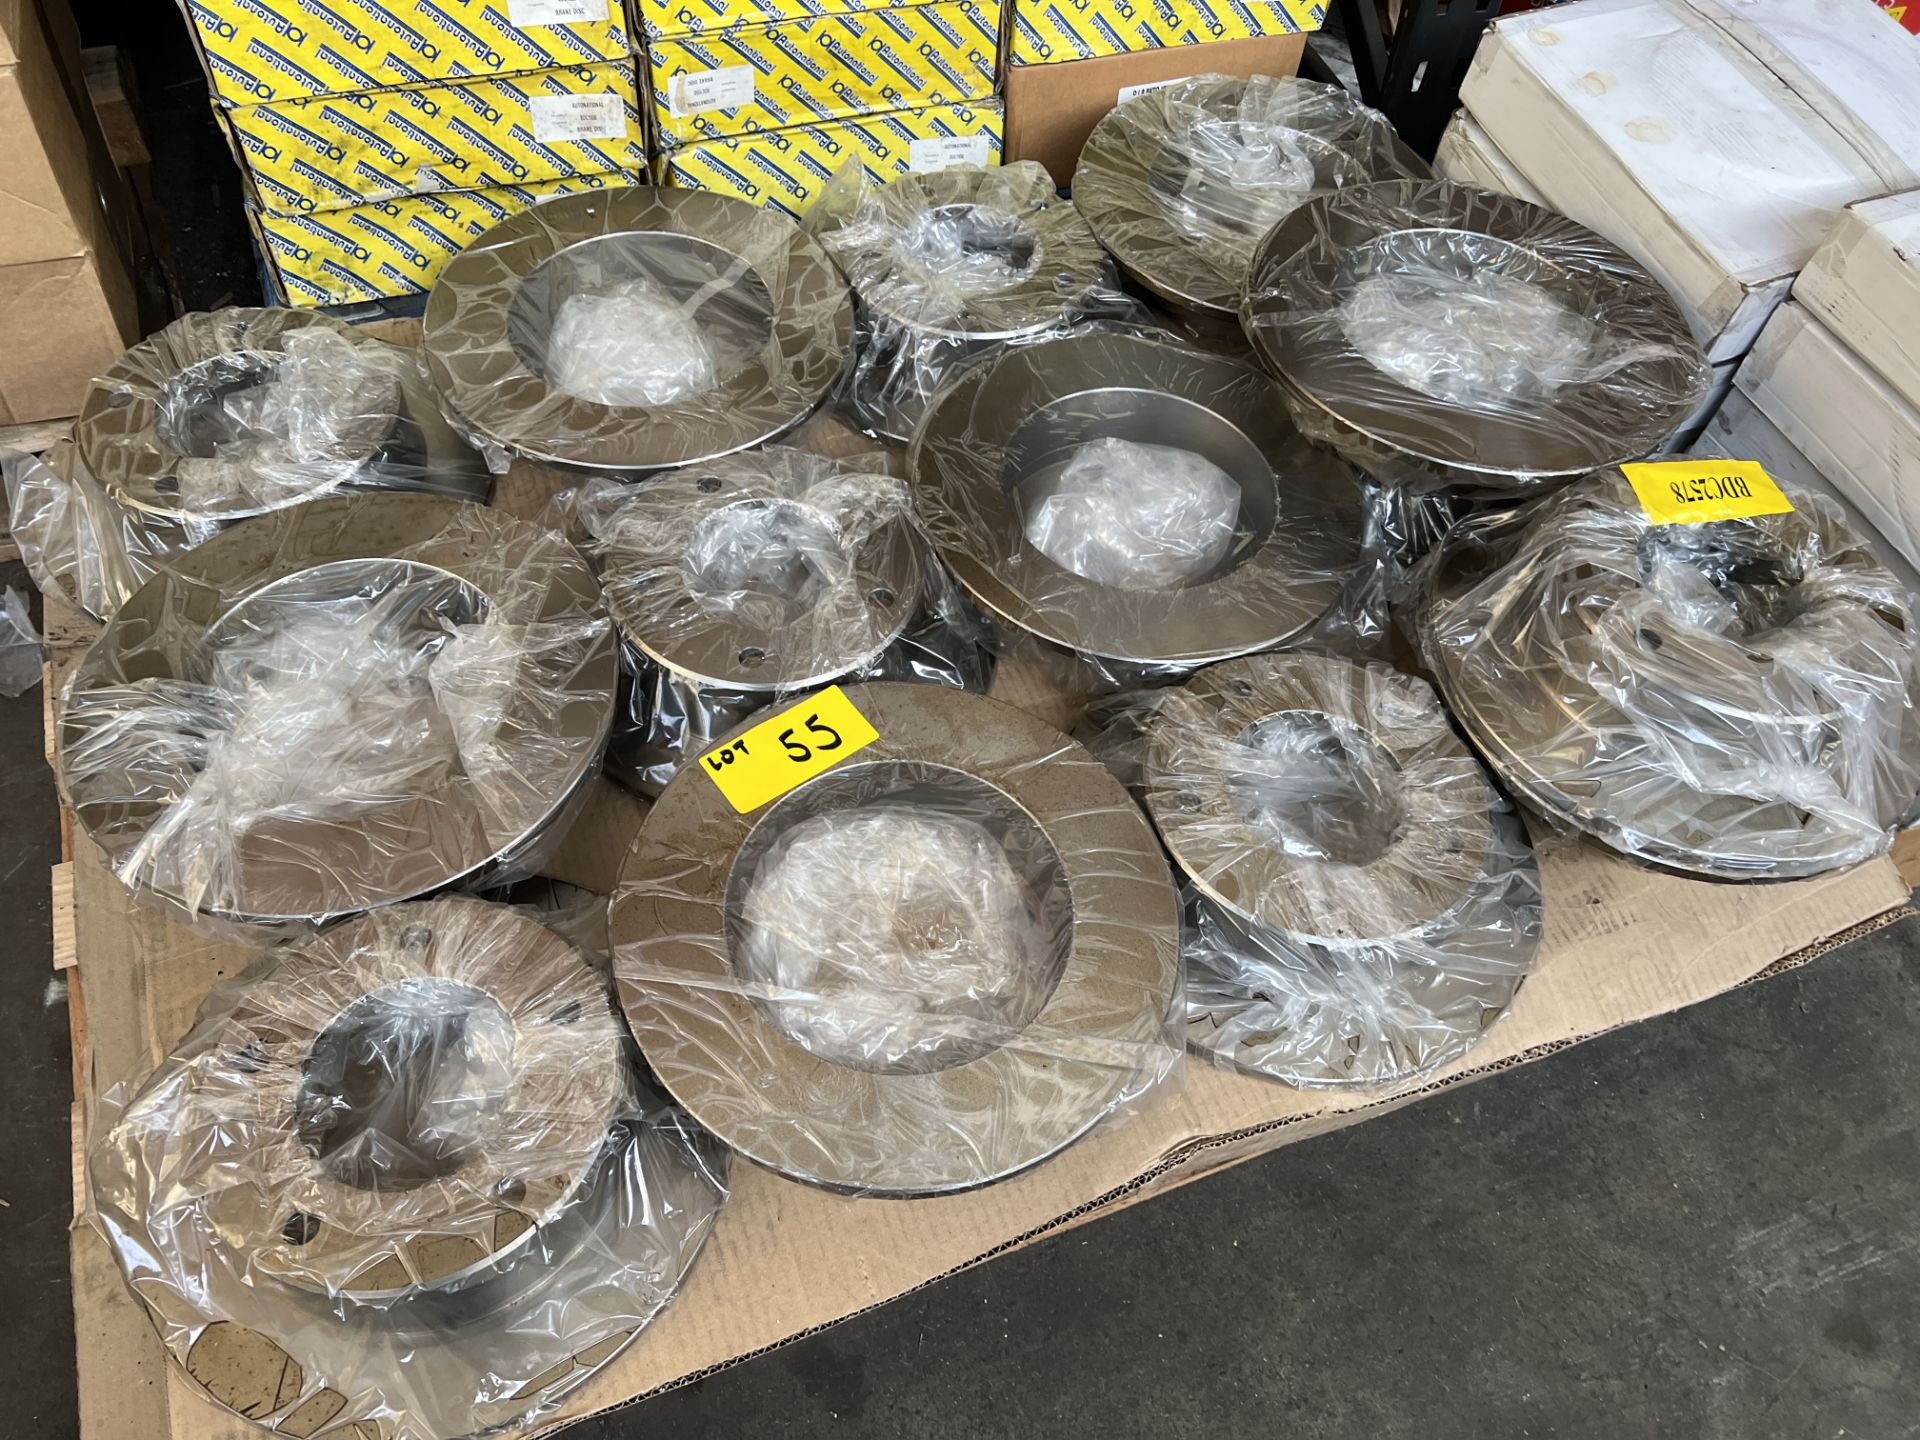 Large Quantity of Land Rover and Range Rover Components including Brake Disks, Drums, Pads, - Image 13 of 32